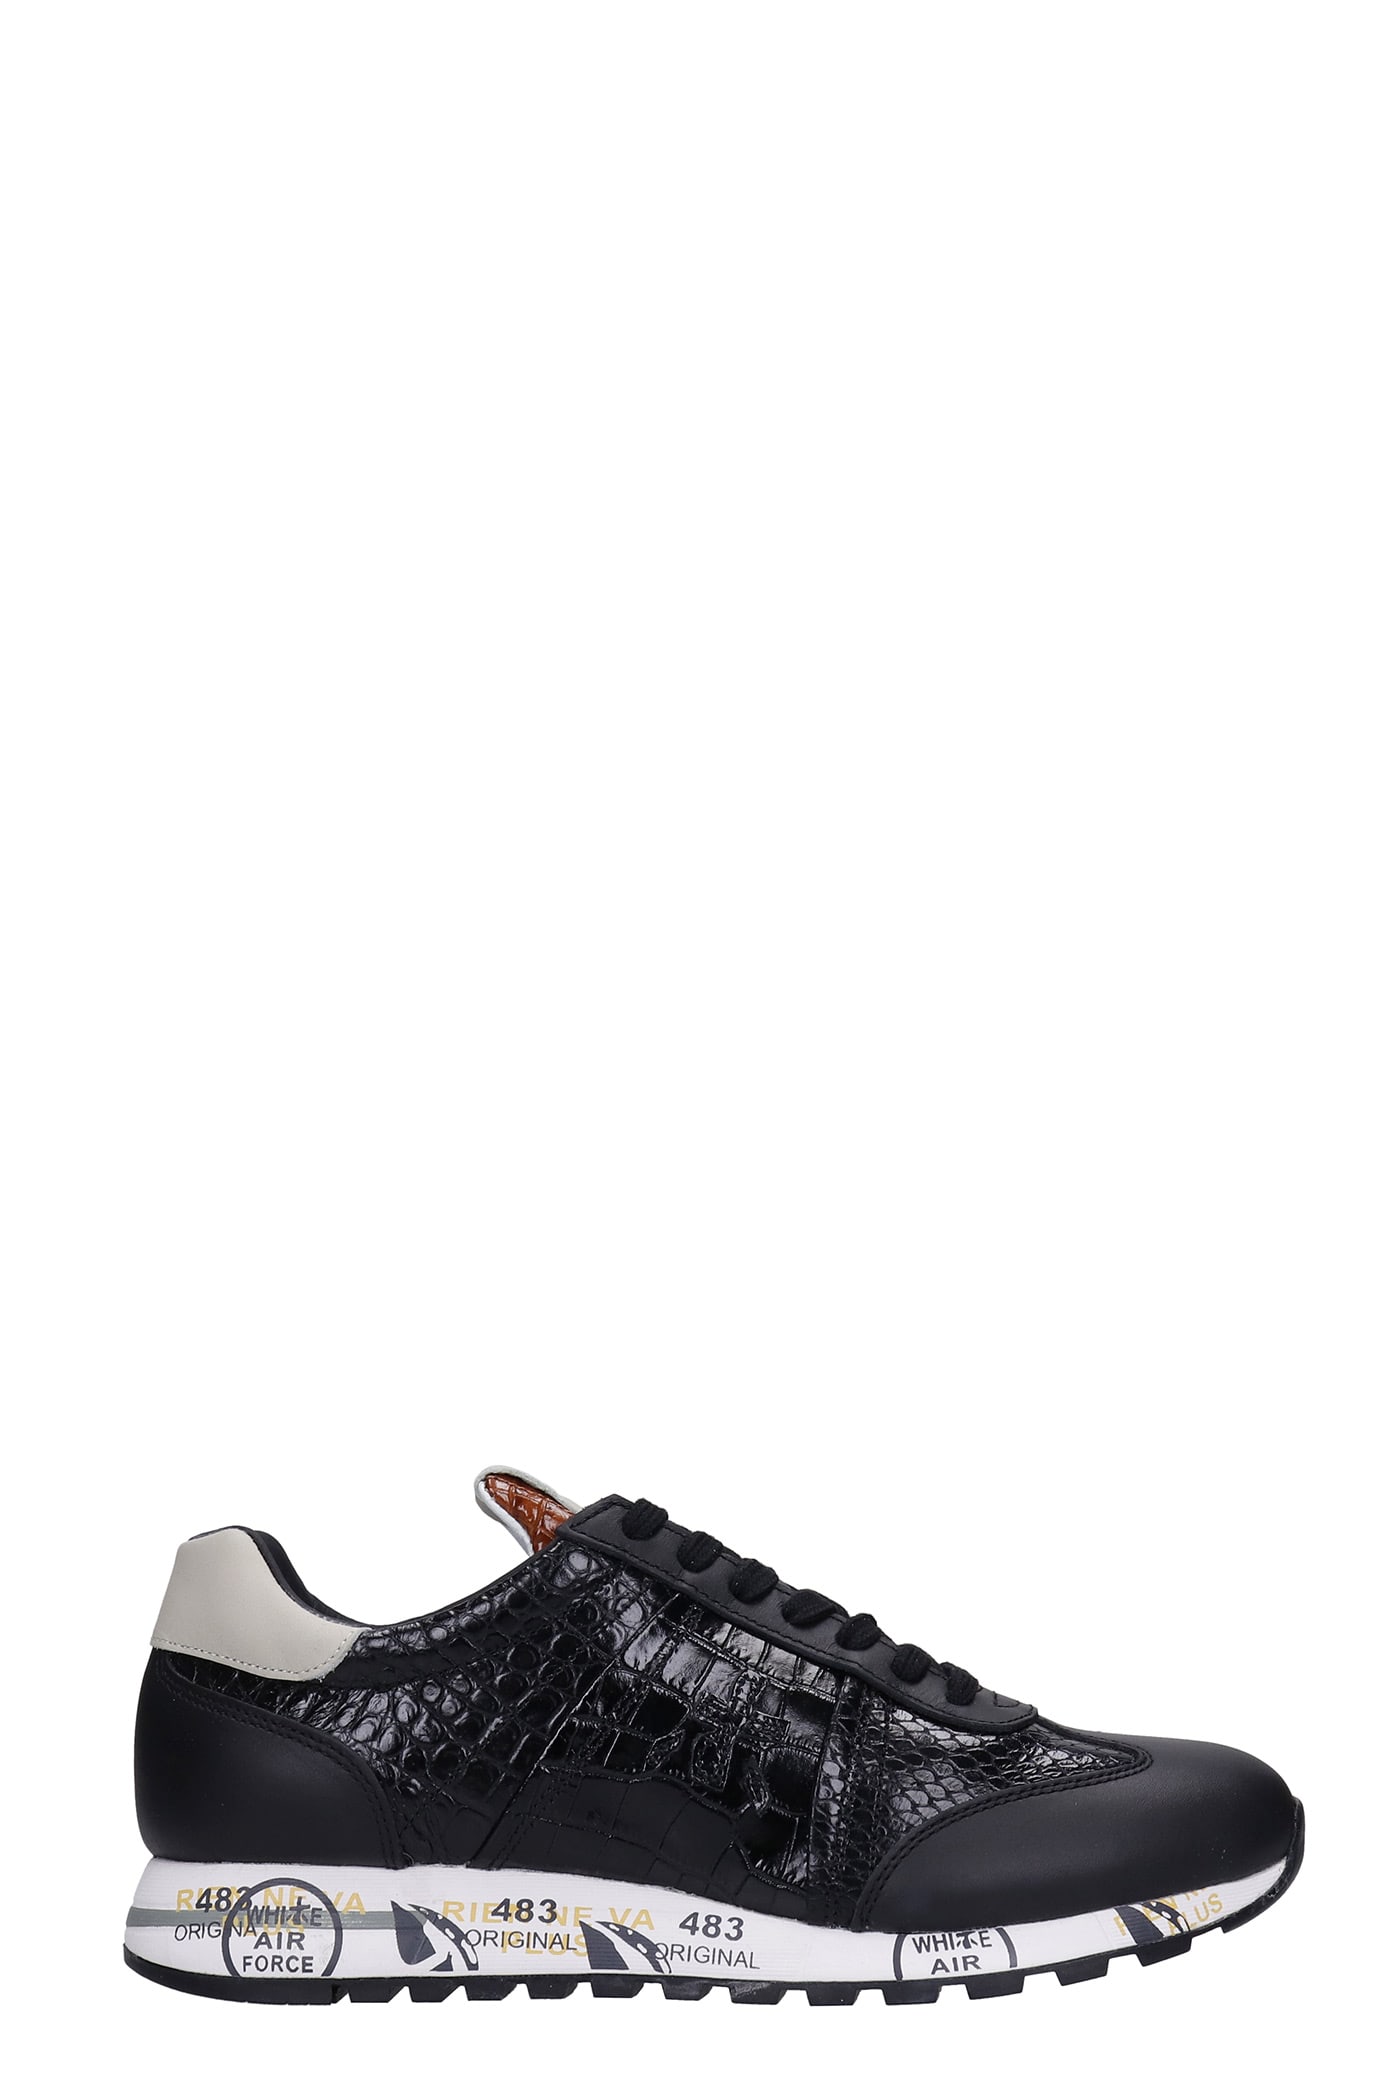 Premiata Lucy Sneakers In Black Leather